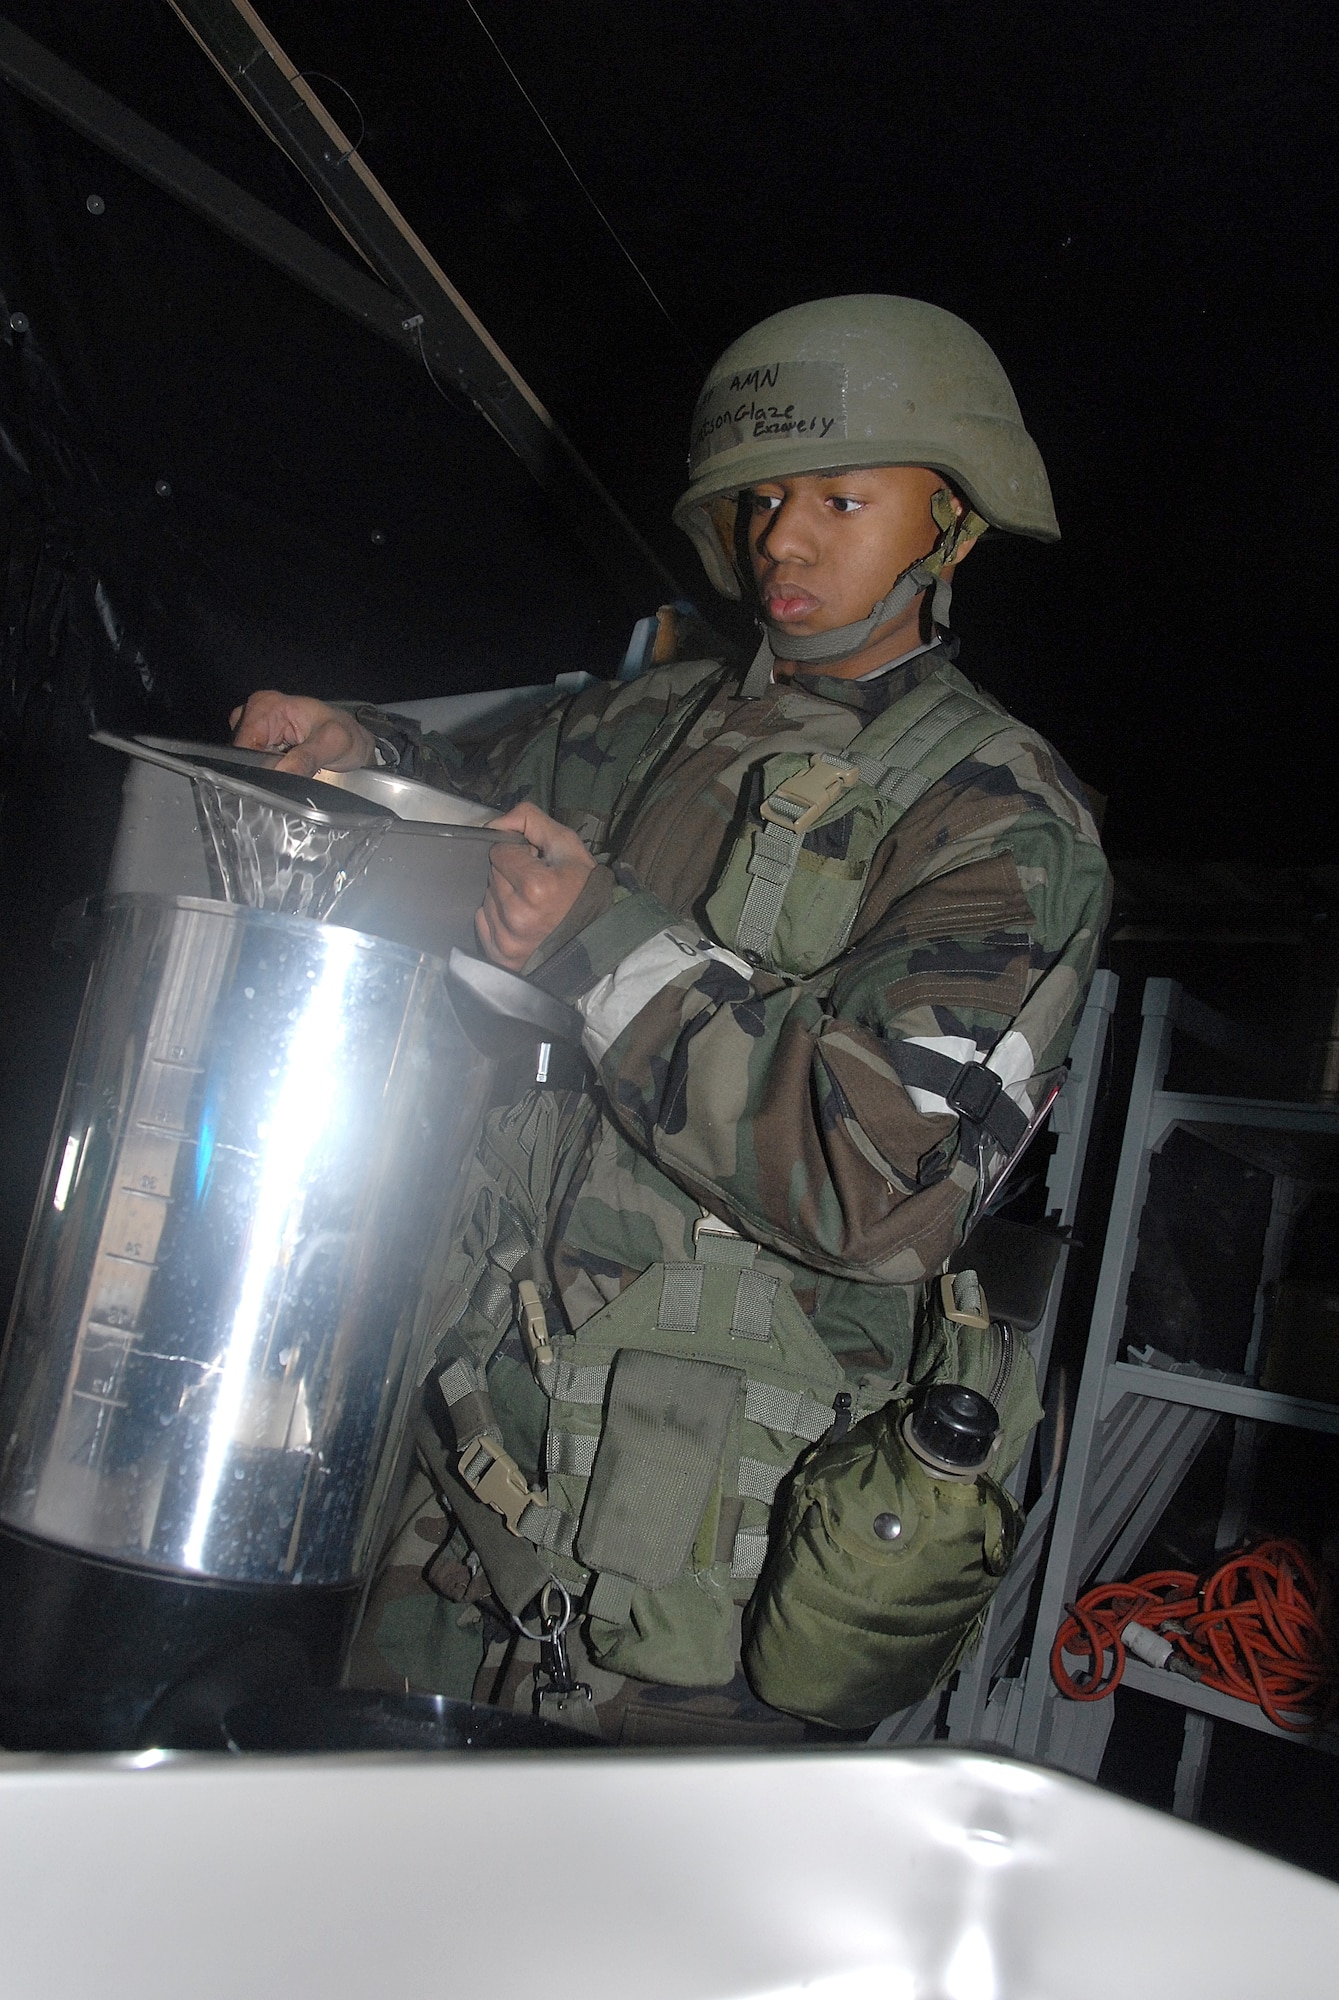 Air Force reservist, Airman Exzavery Watsonglaze, a food-services journeyman with the 442nd Services Flight, prepares morning coffee for fellow reservists during an operational-readiness exercise at Whiteman Air Force Base, Mo. The flight's parent unit, the 442nd Fighter Wing, is an Air Force Reserve A-10 Thunderbolt II unit based at Whiteman. (US Air Force photo/Master Sgt. Bill Huntington)